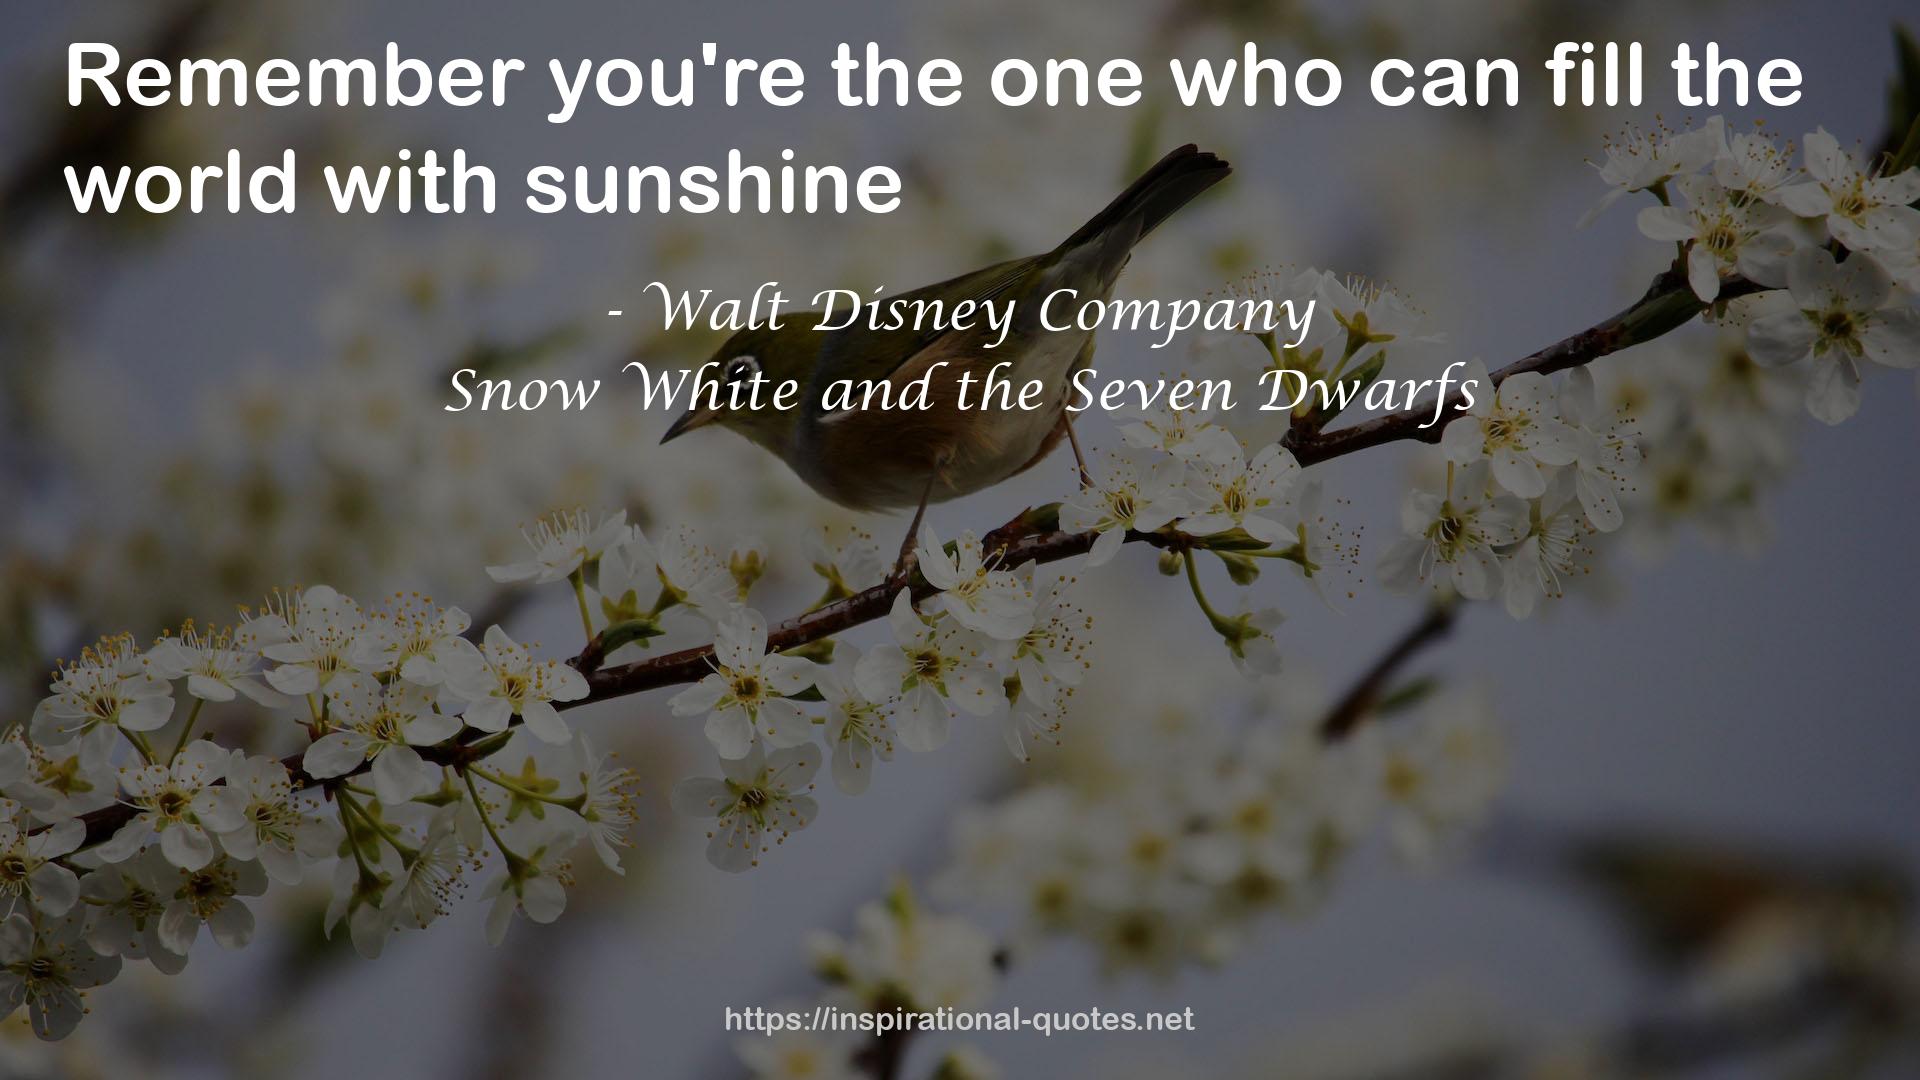 Snow White and the Seven Dwarfs QUOTES